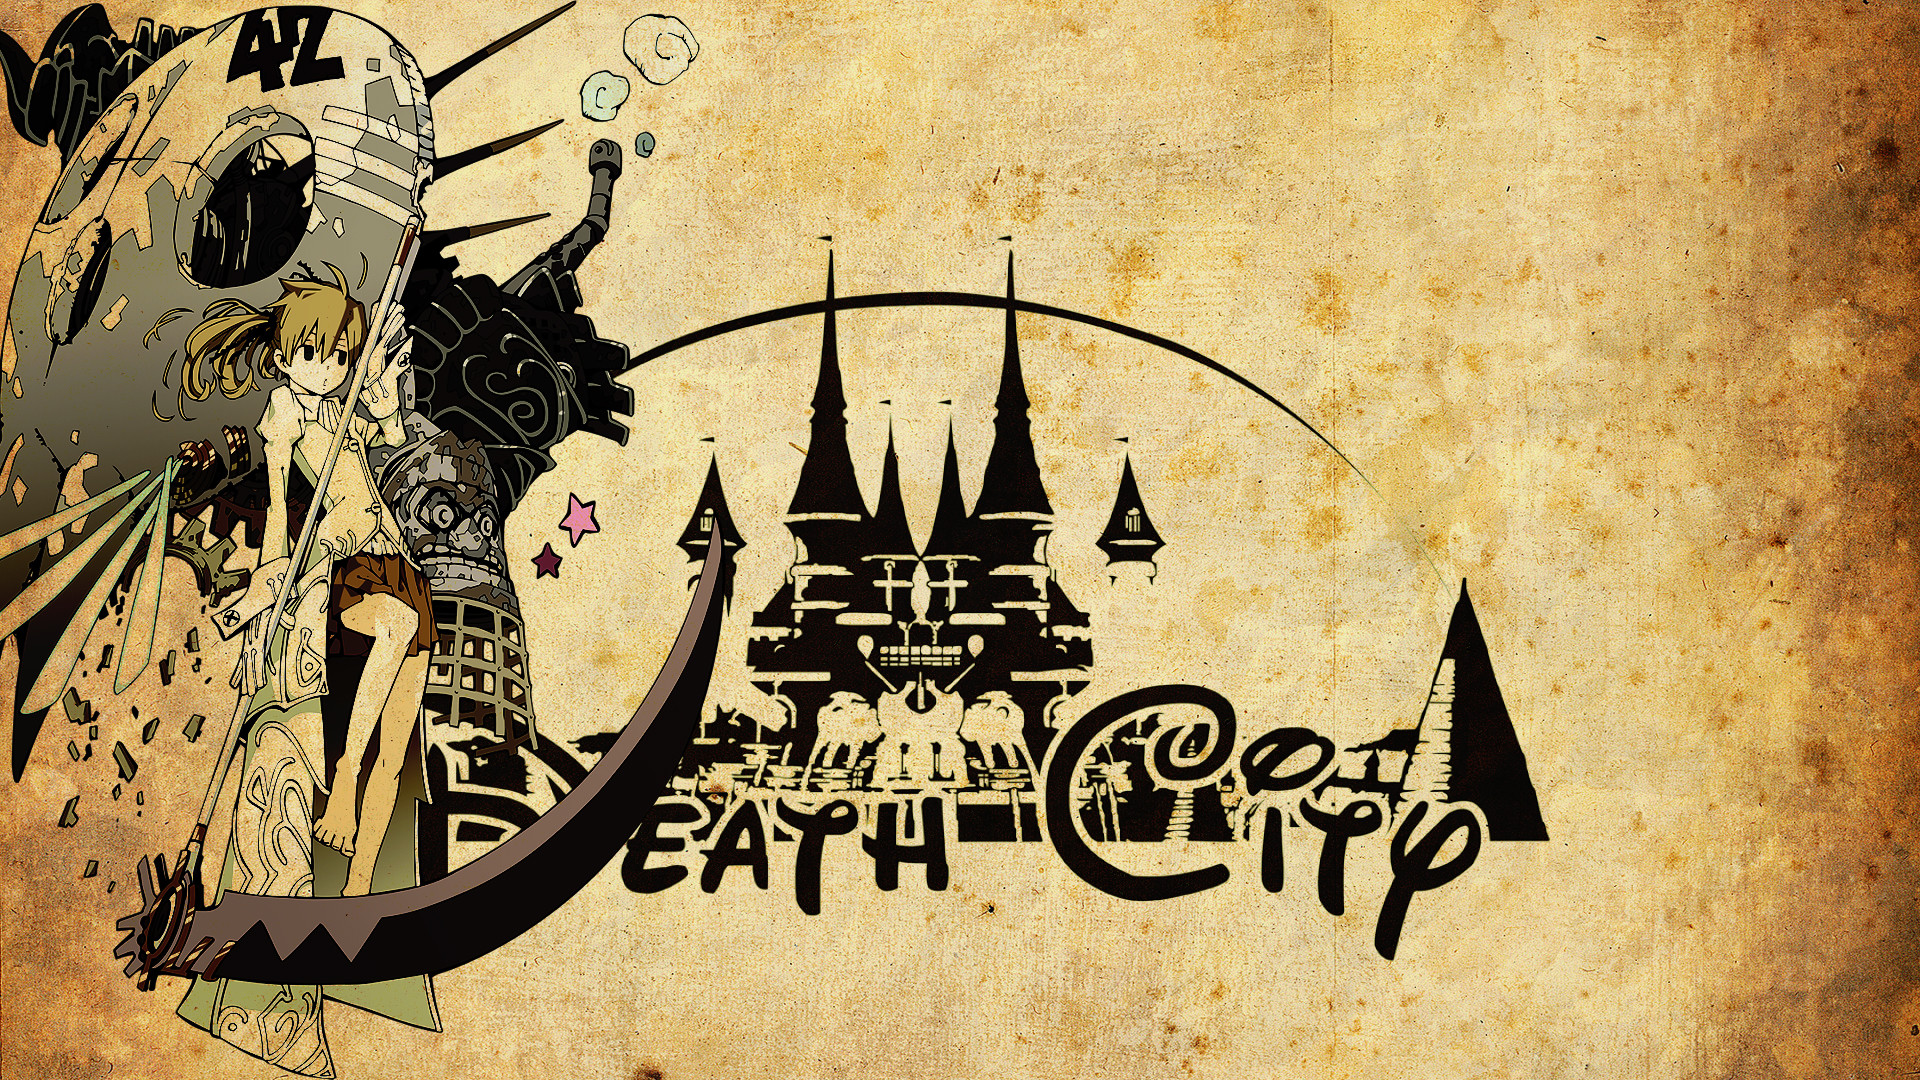 1920x1080 ... Death City - Soul Eater Wallpaper by Siimeo